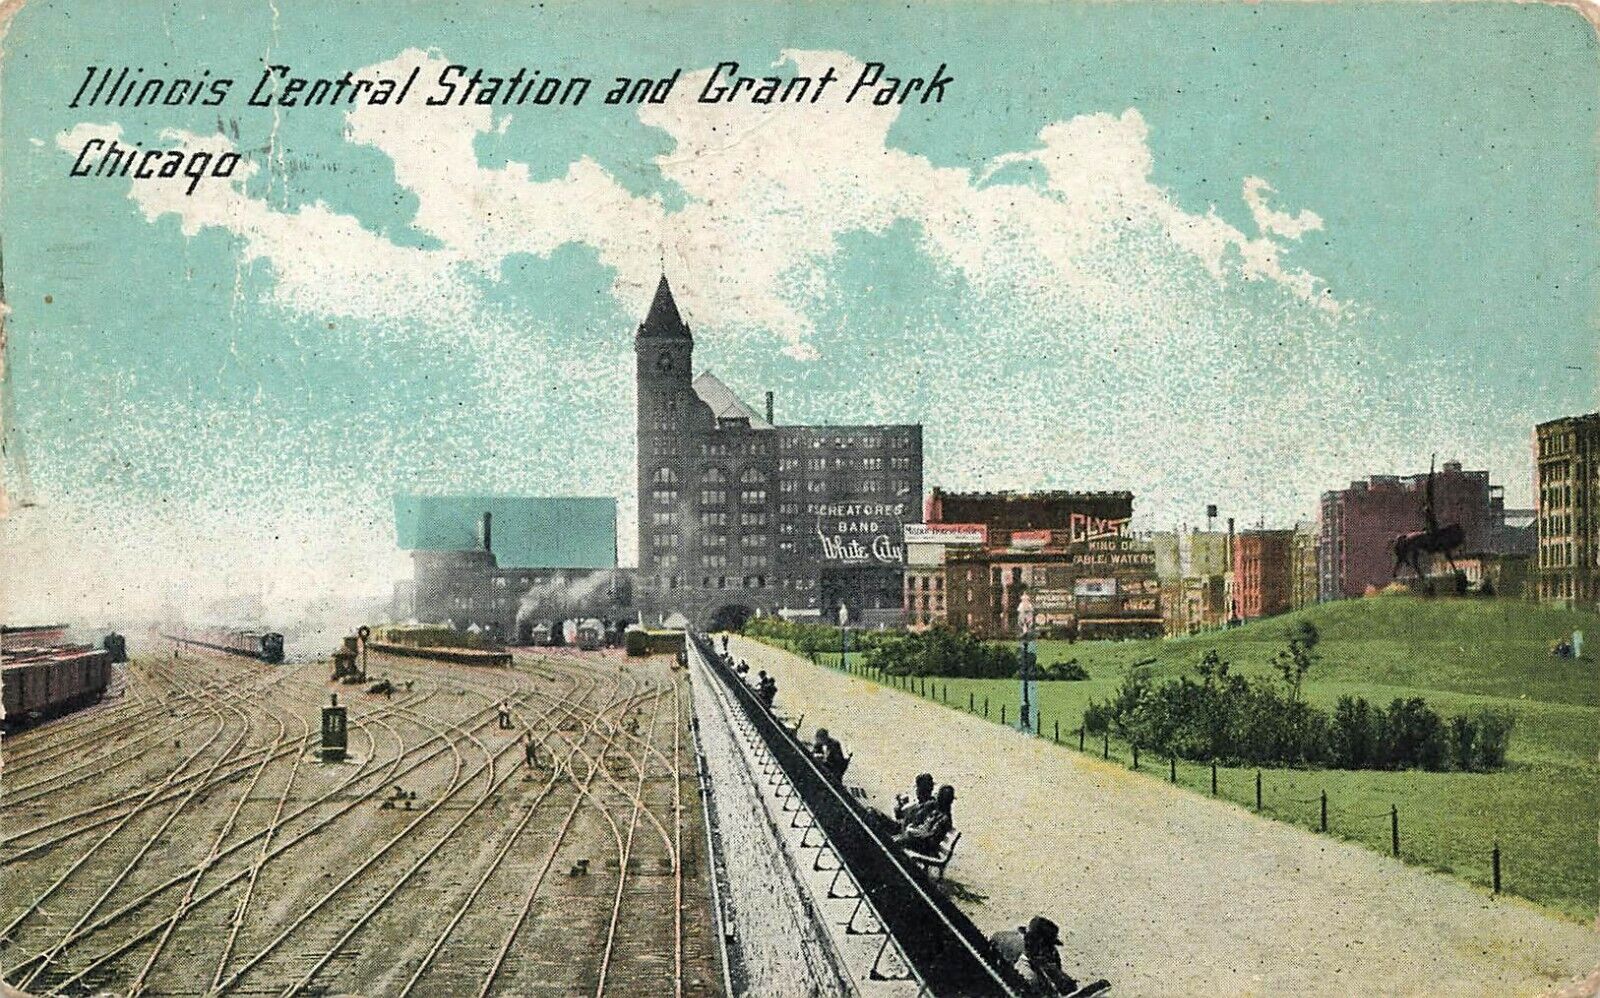 1912 ILLINOIS POSTCARD: TRAINS AT CENTRAL STATION & GRANT PARK, CHICAGO, IL